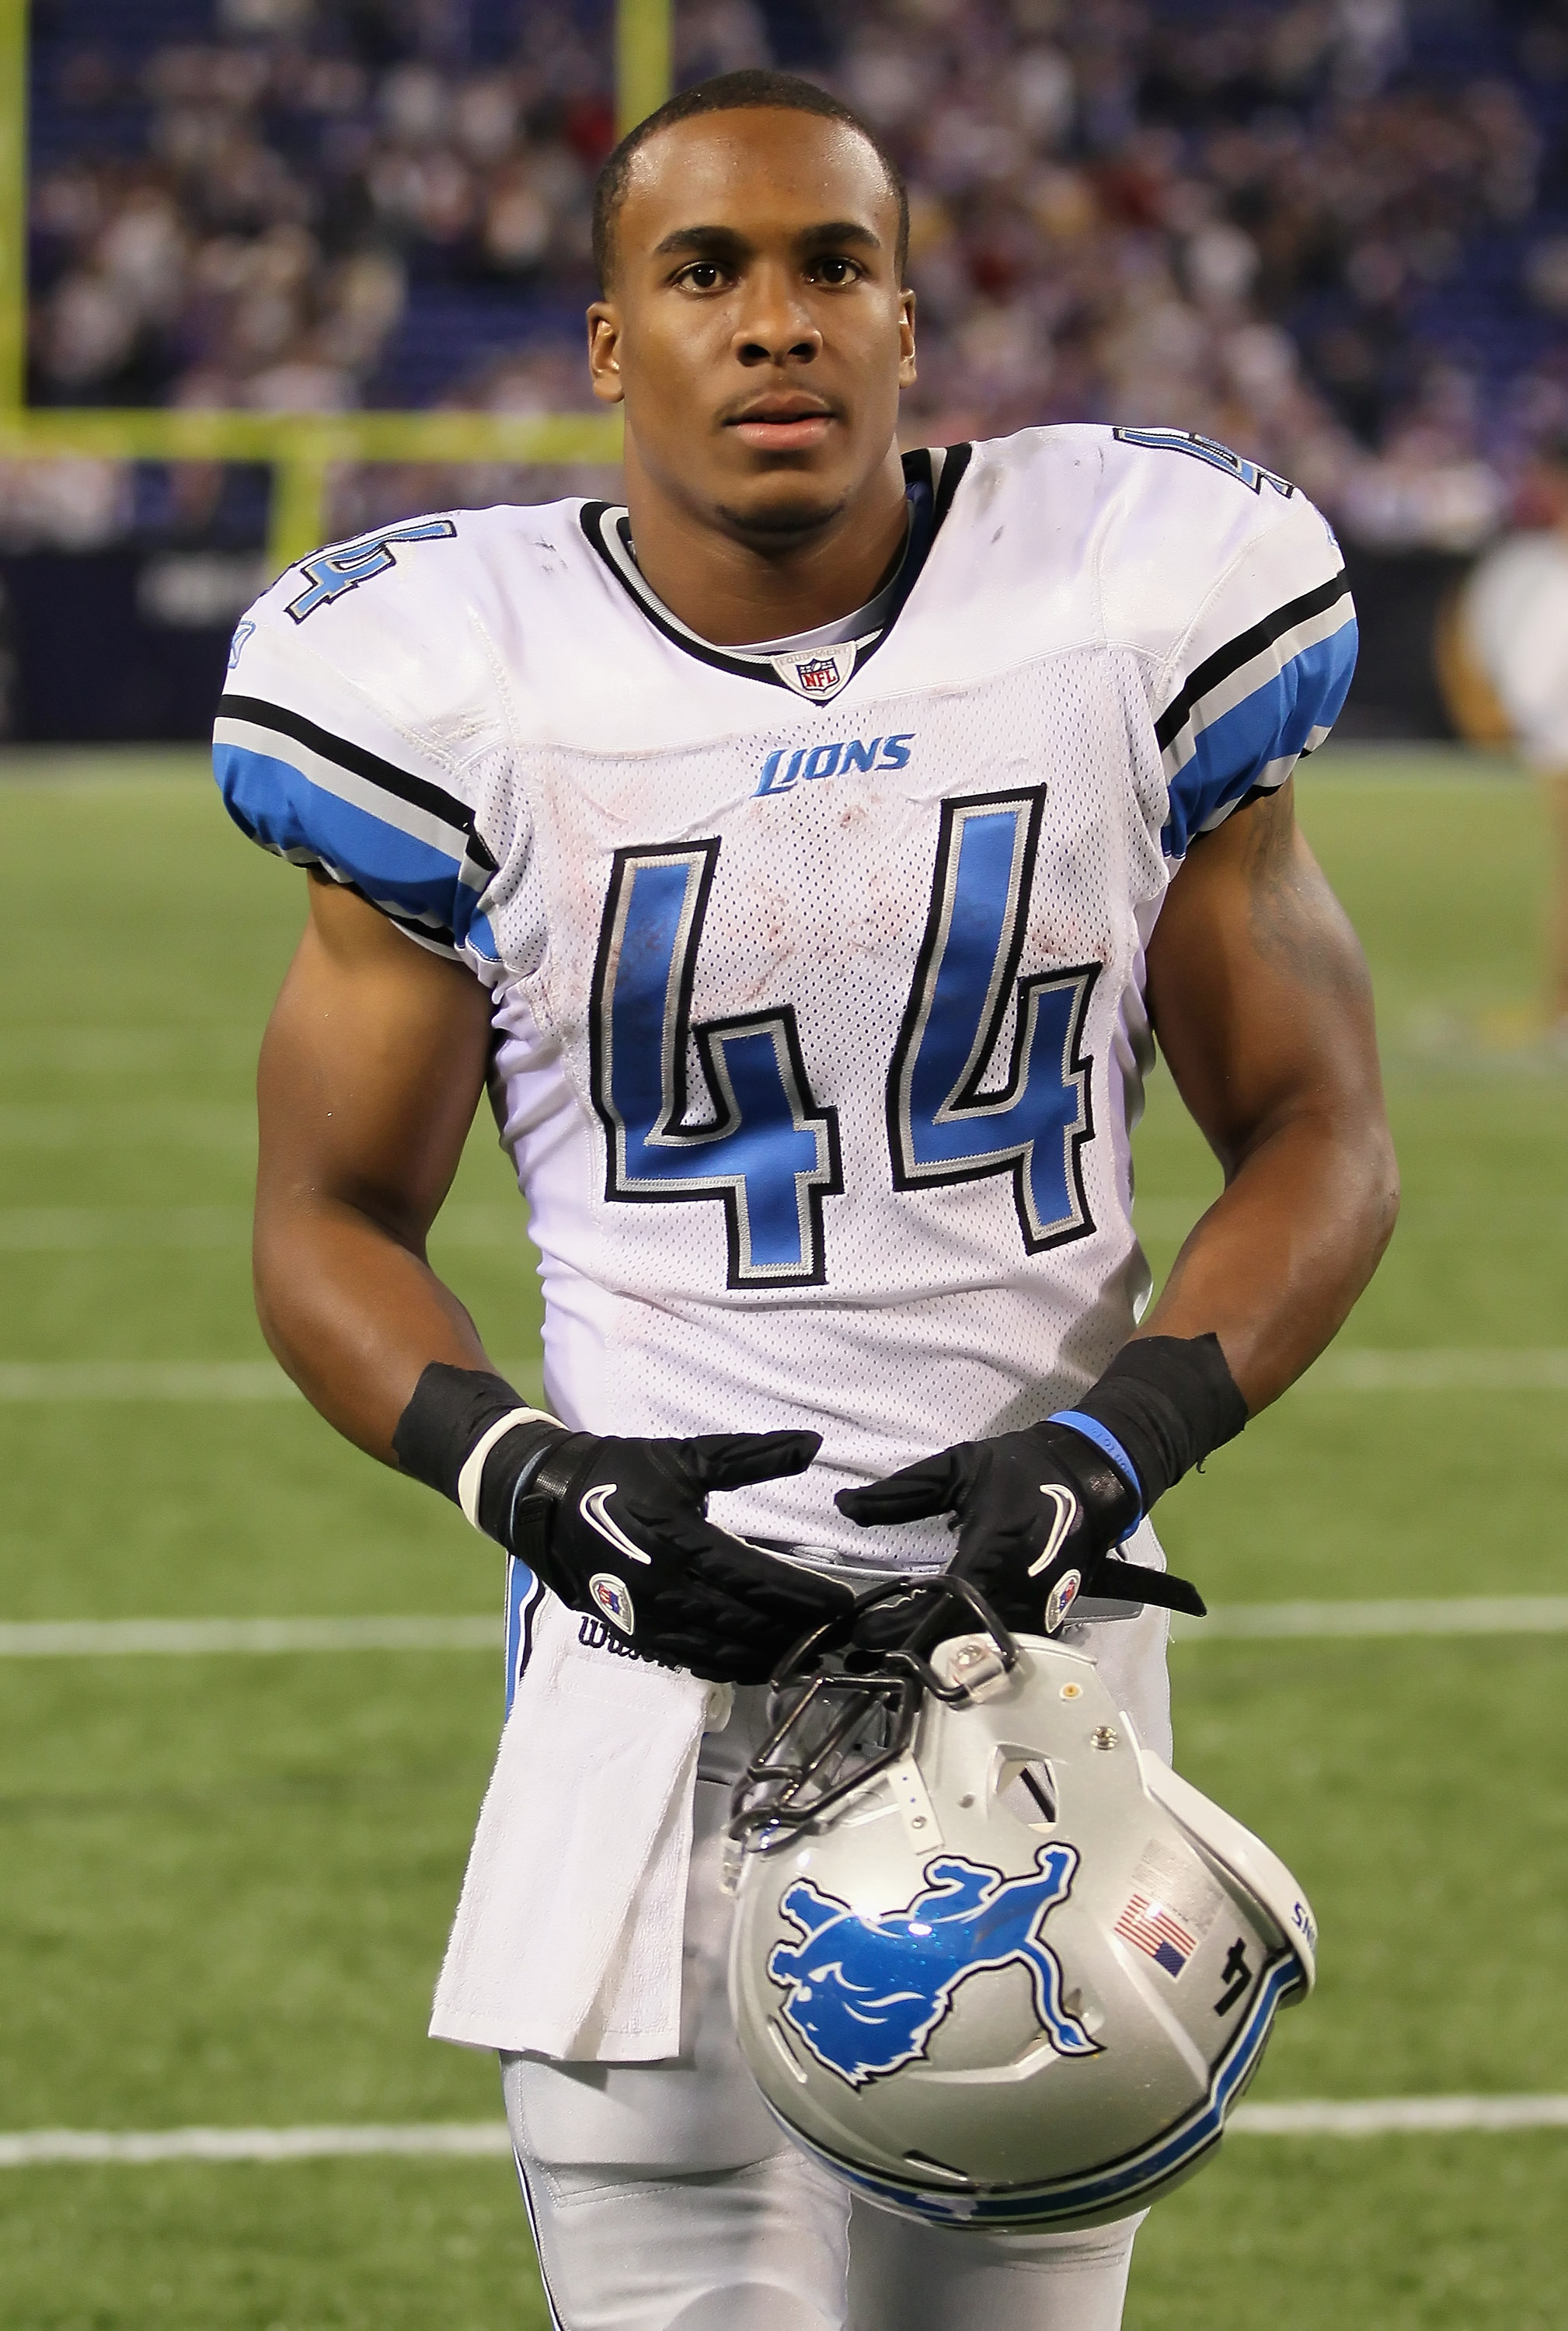 MINNEAPOLIS - SEPTEMBER 26:  Running back Jahvid Best #44 of the Detroit Lions walks off the field following the game against the Minnesota Vikings at Mall of America Field on September 26, 2010 in Minneapolis, Minnesota. The Vikings defeated the Lions 24